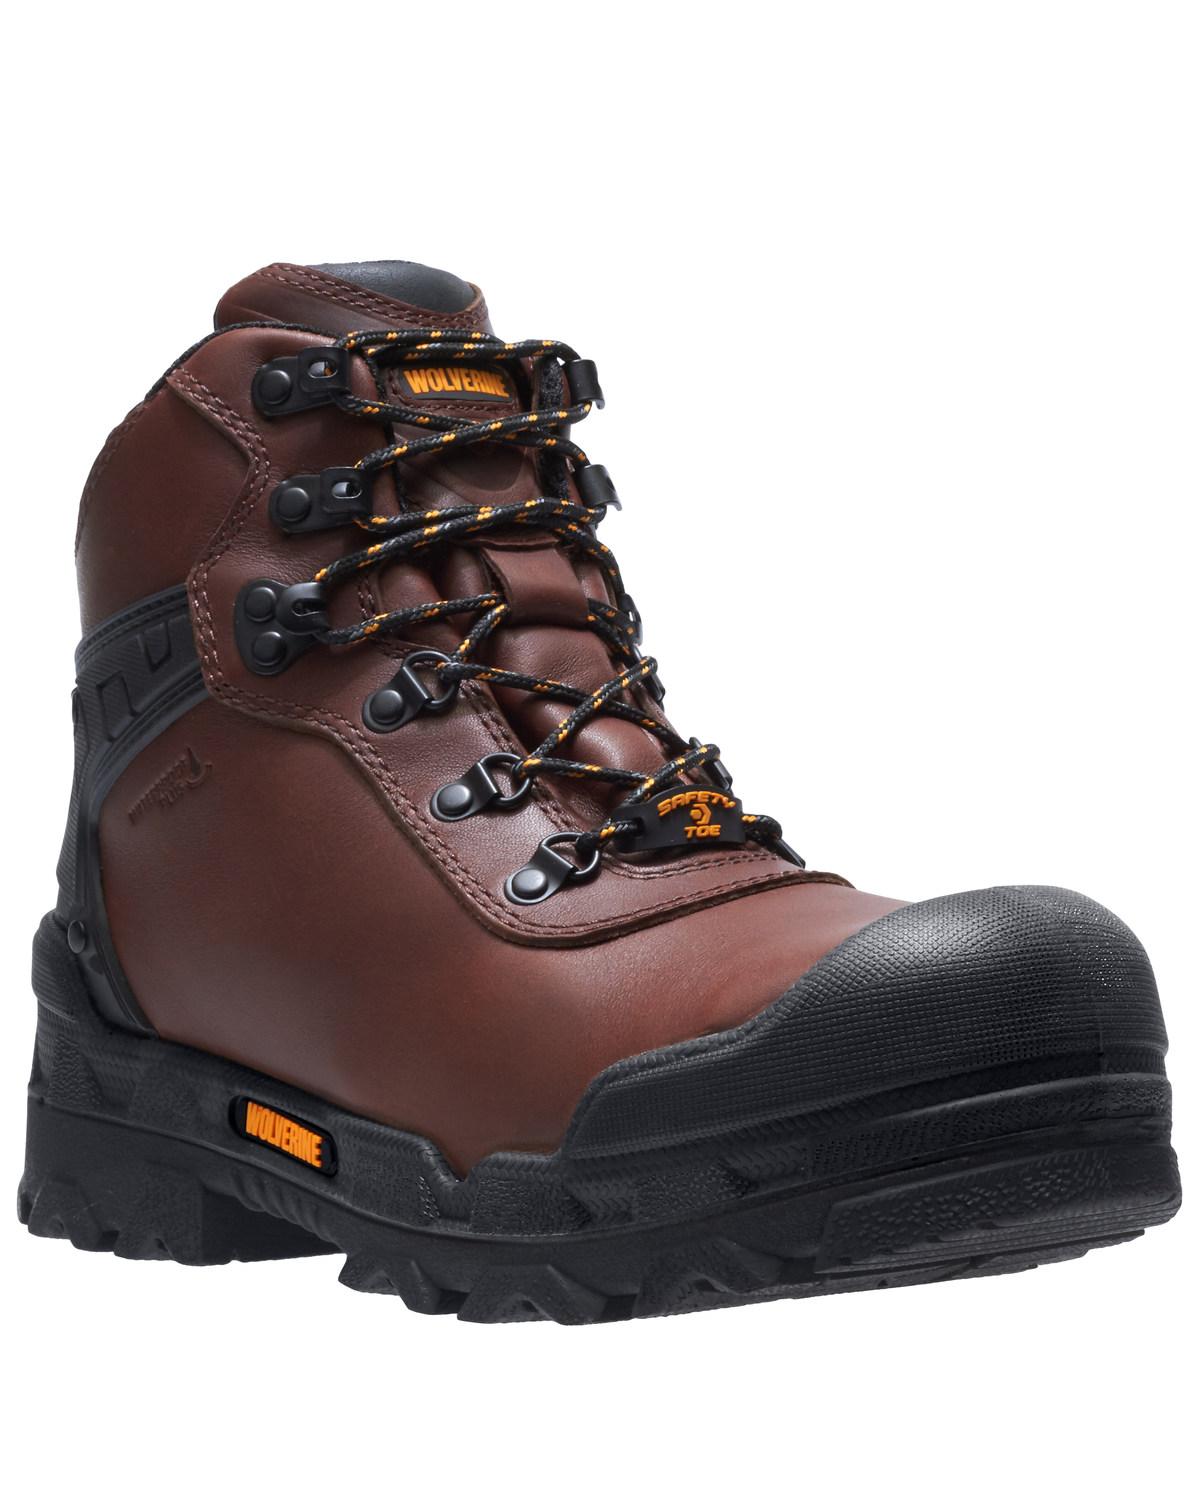 wolverine work boots composite toe